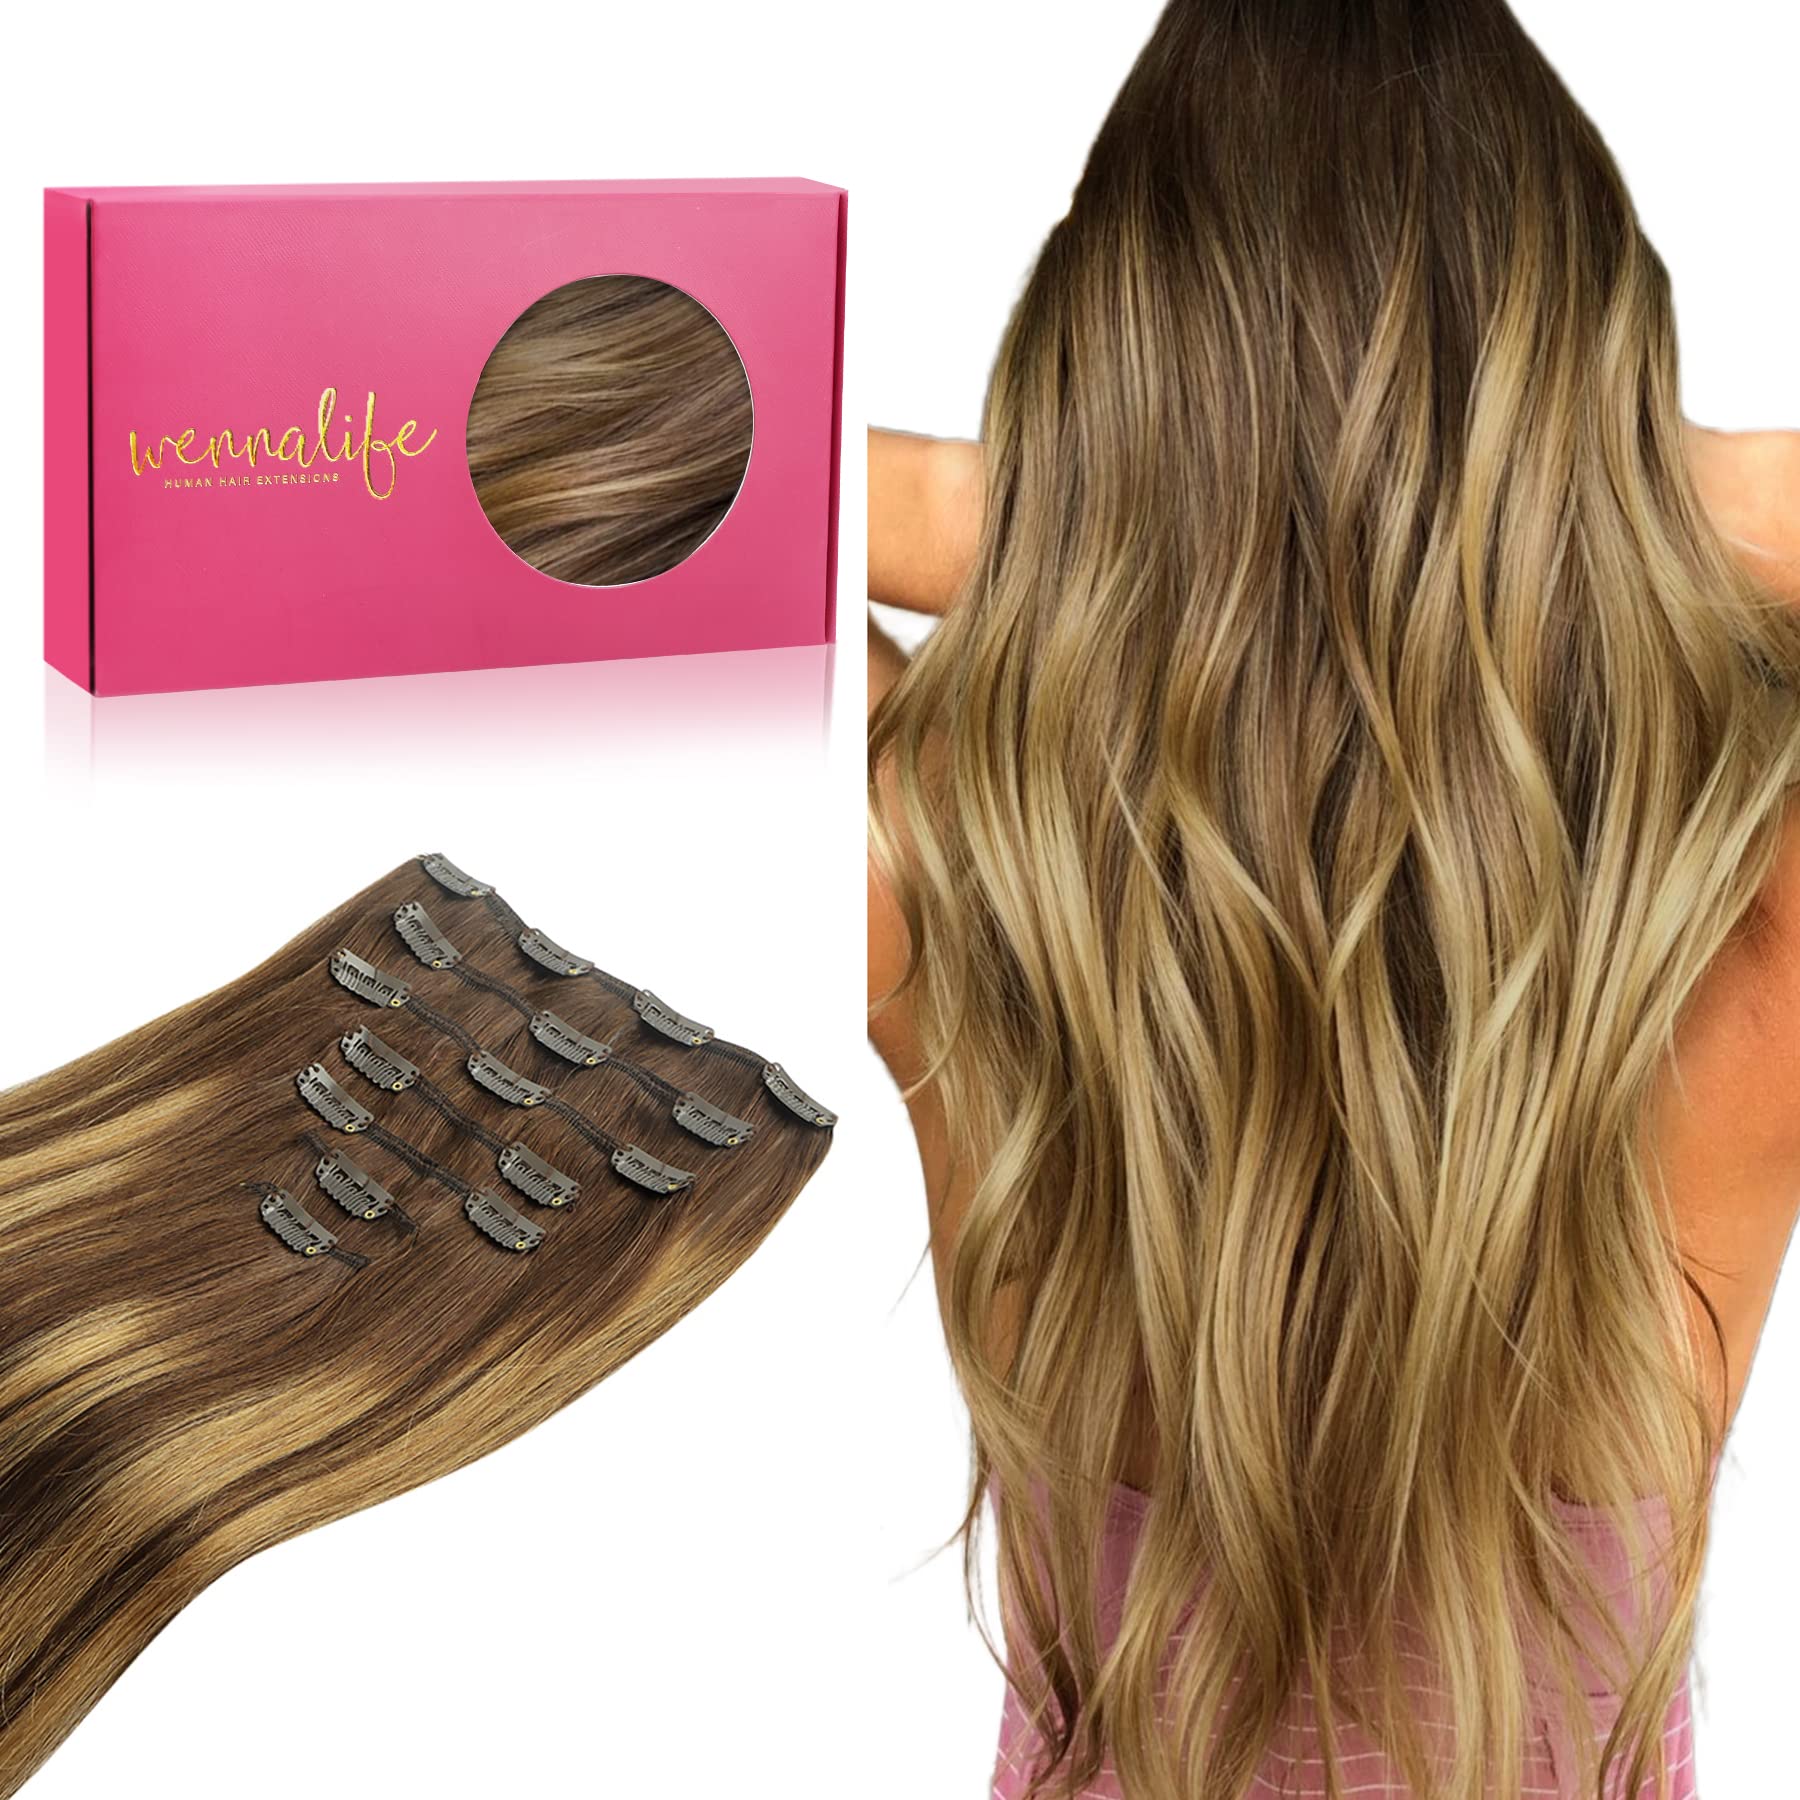 Wennalife Clip In Hair Extensions, 14 Inch 120G 7Pcs Balayage Chocolate Brown To Caramel Blonde Hair Extensions Clip In Human Ha